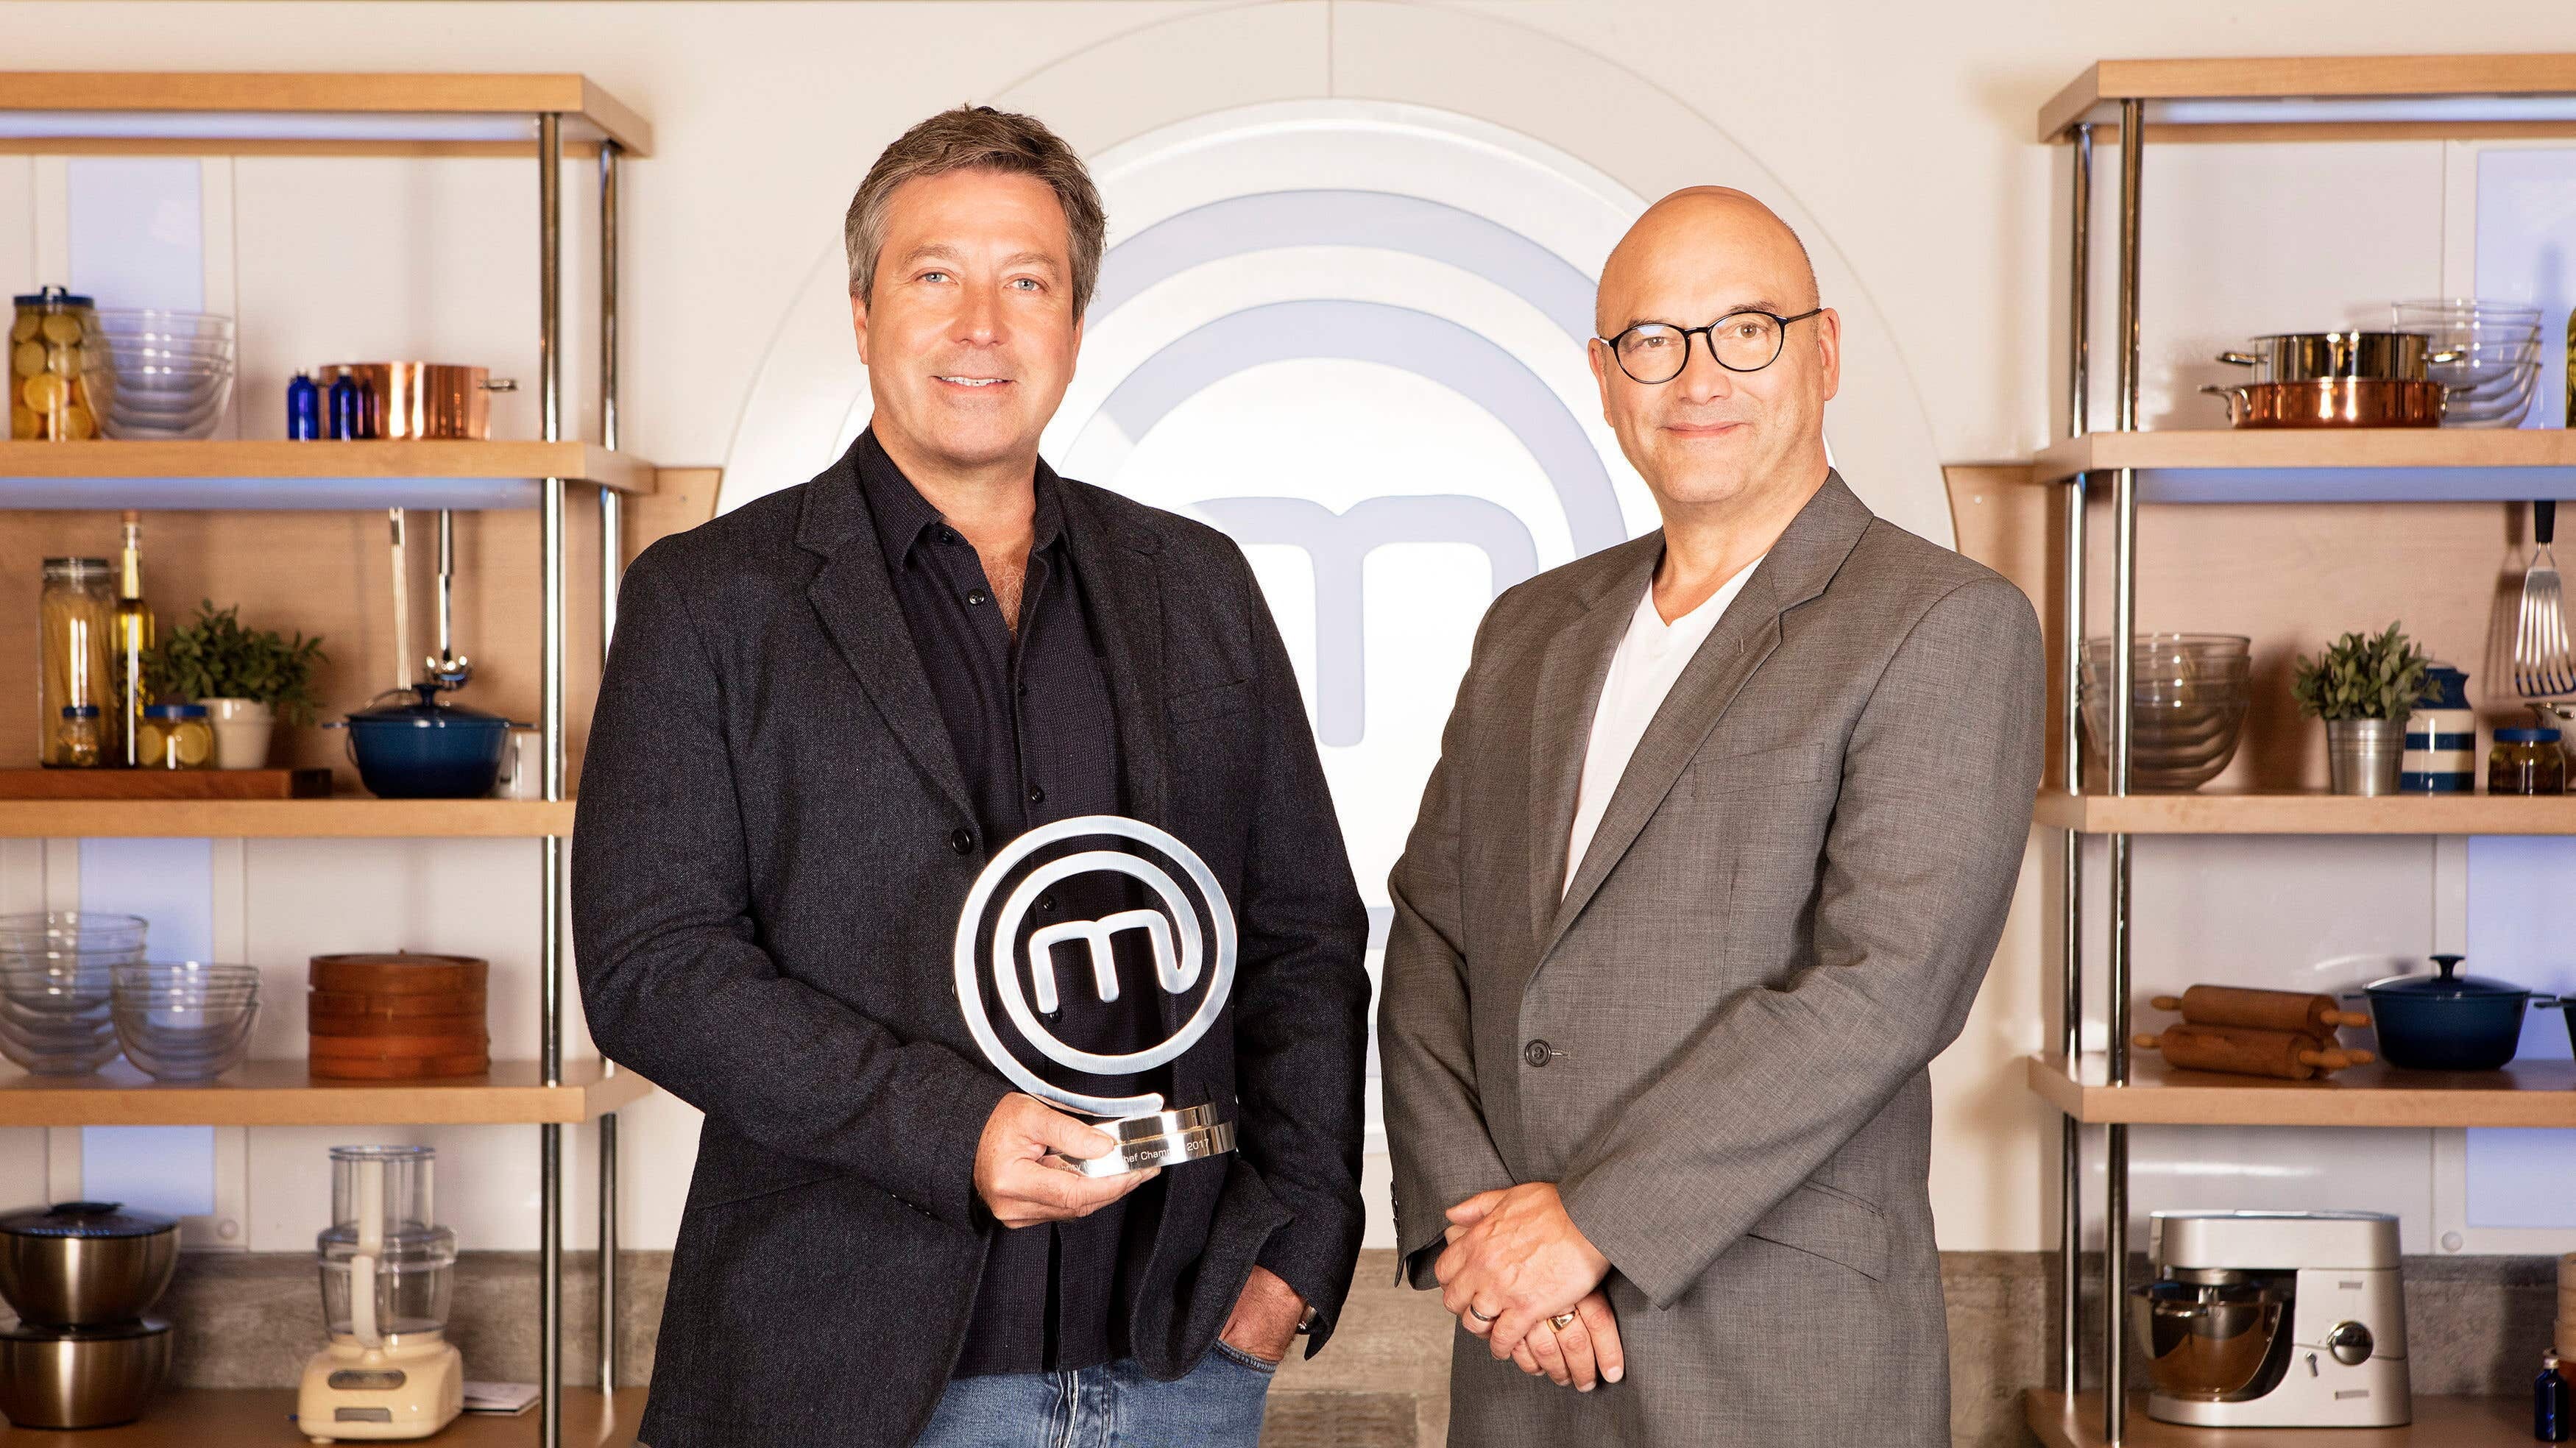 The specials, hosted by MasterChef judges Gregg Wallace and John Torode, will feature some of the most memorable celebrities from past series.